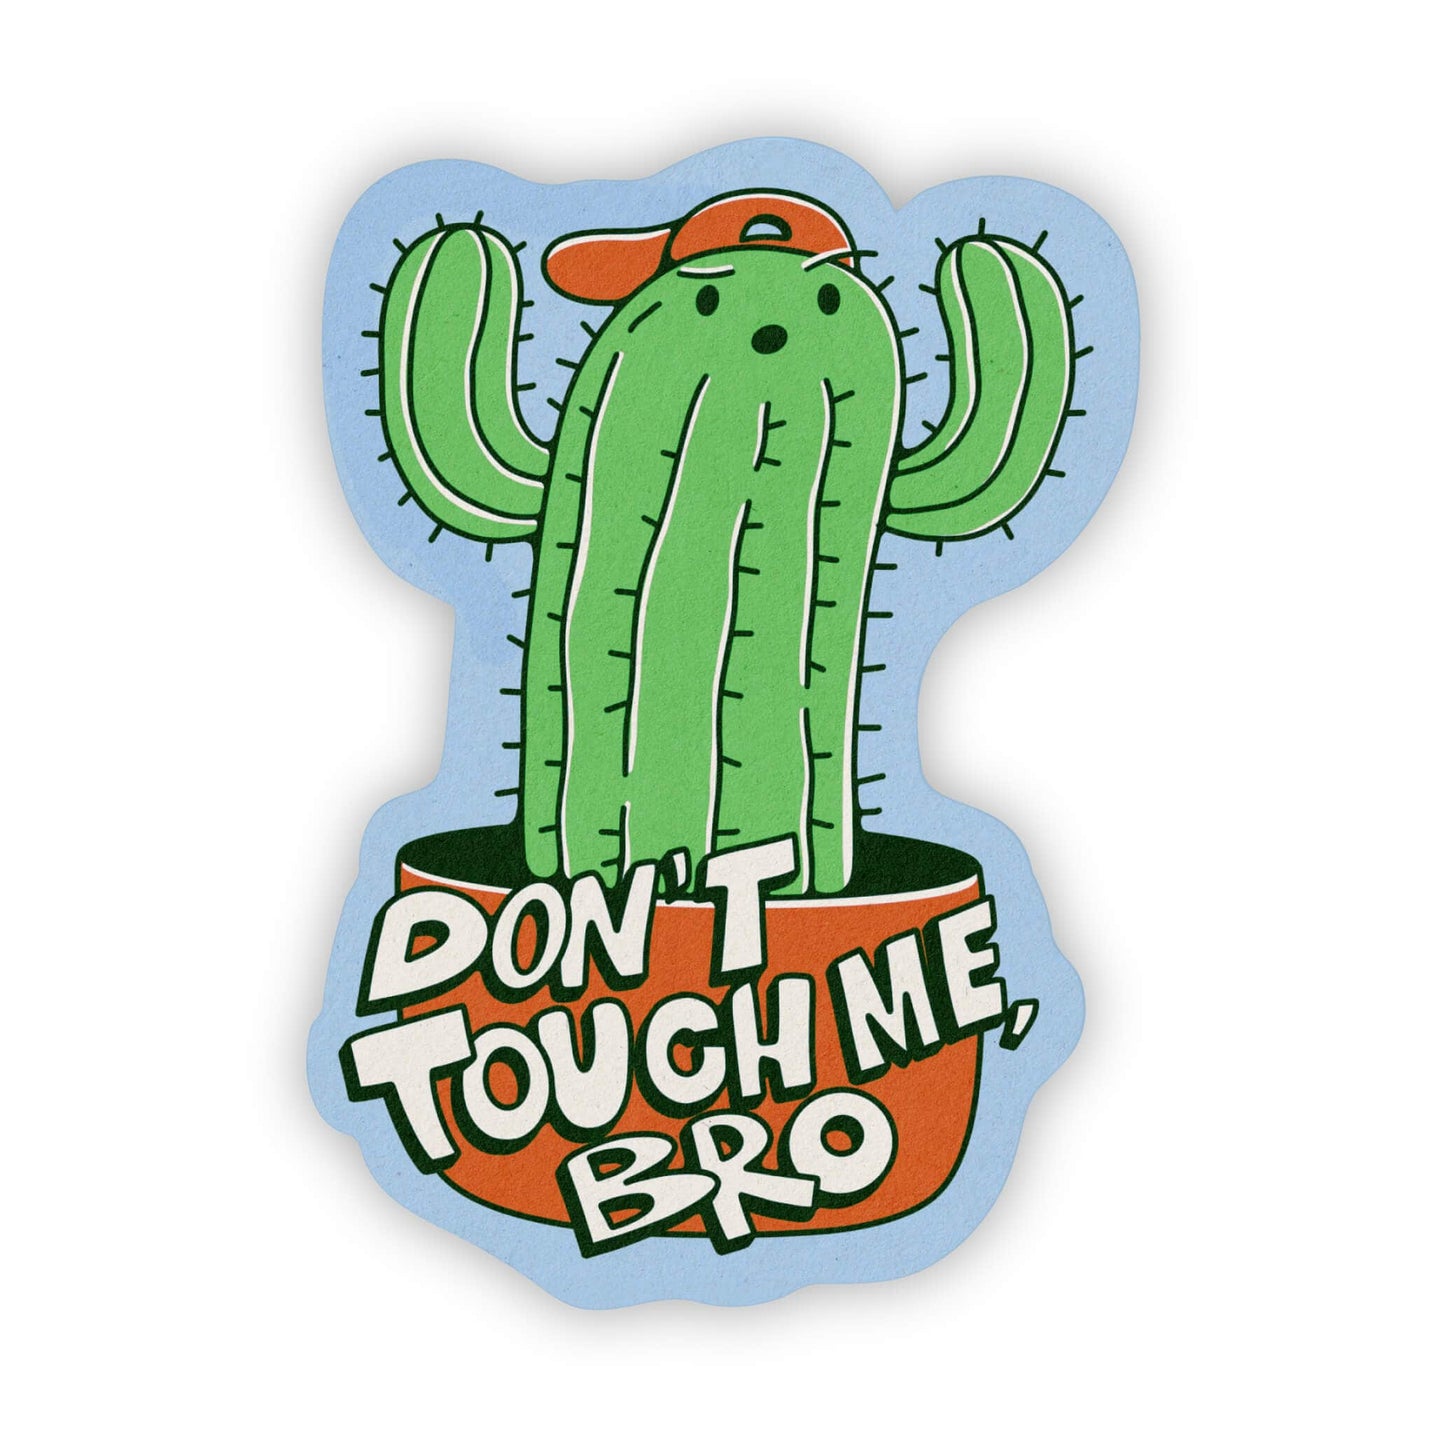 Don't touch me bro cactus sticker